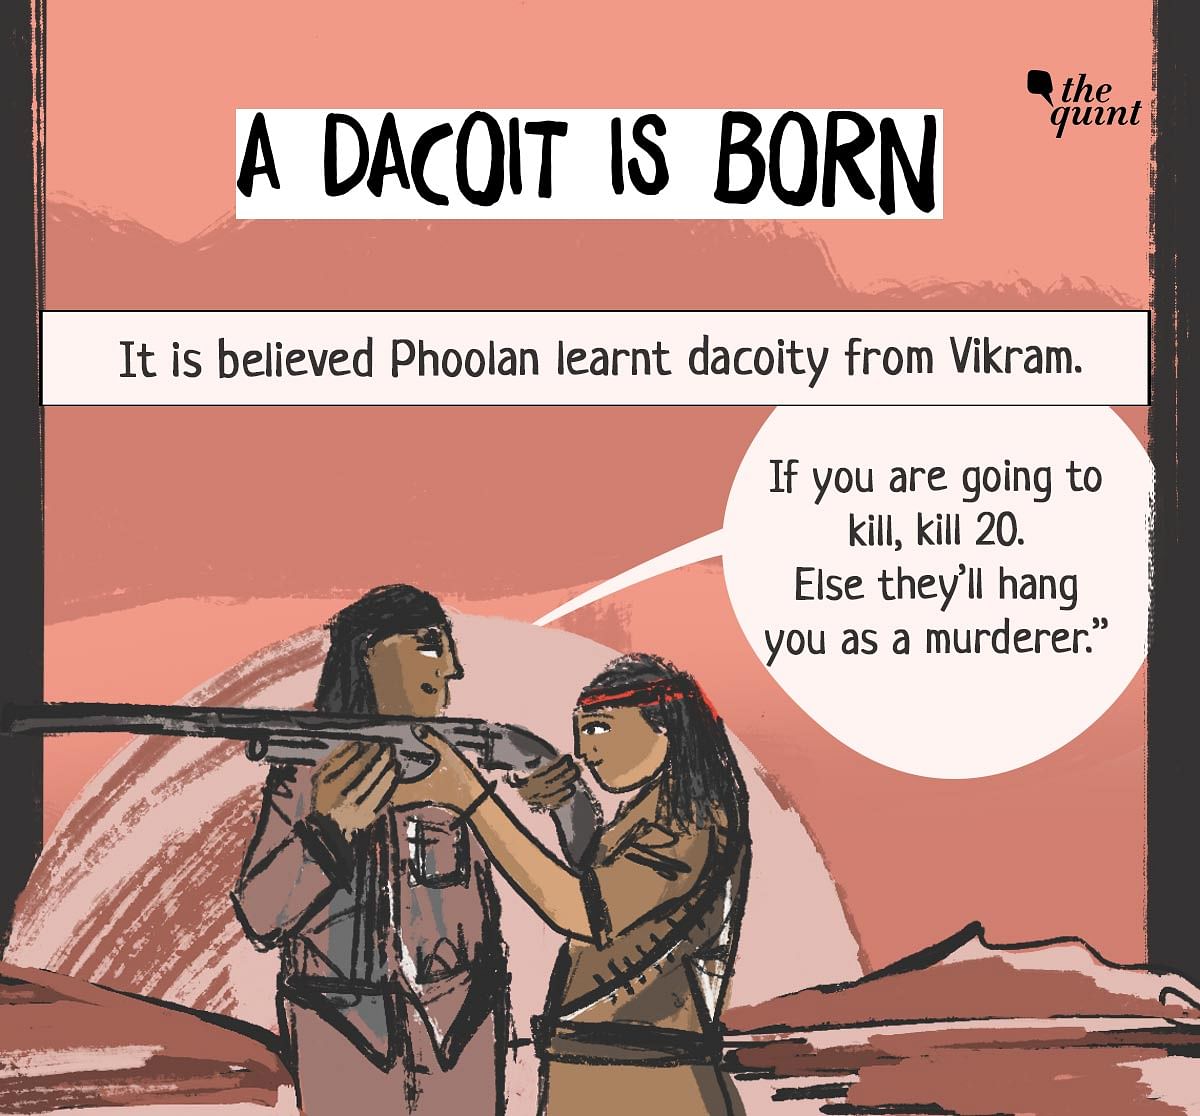 How did this highly controversial yet extraordinary woman become a feminist icon? We trace Phoolan Devi’s story.